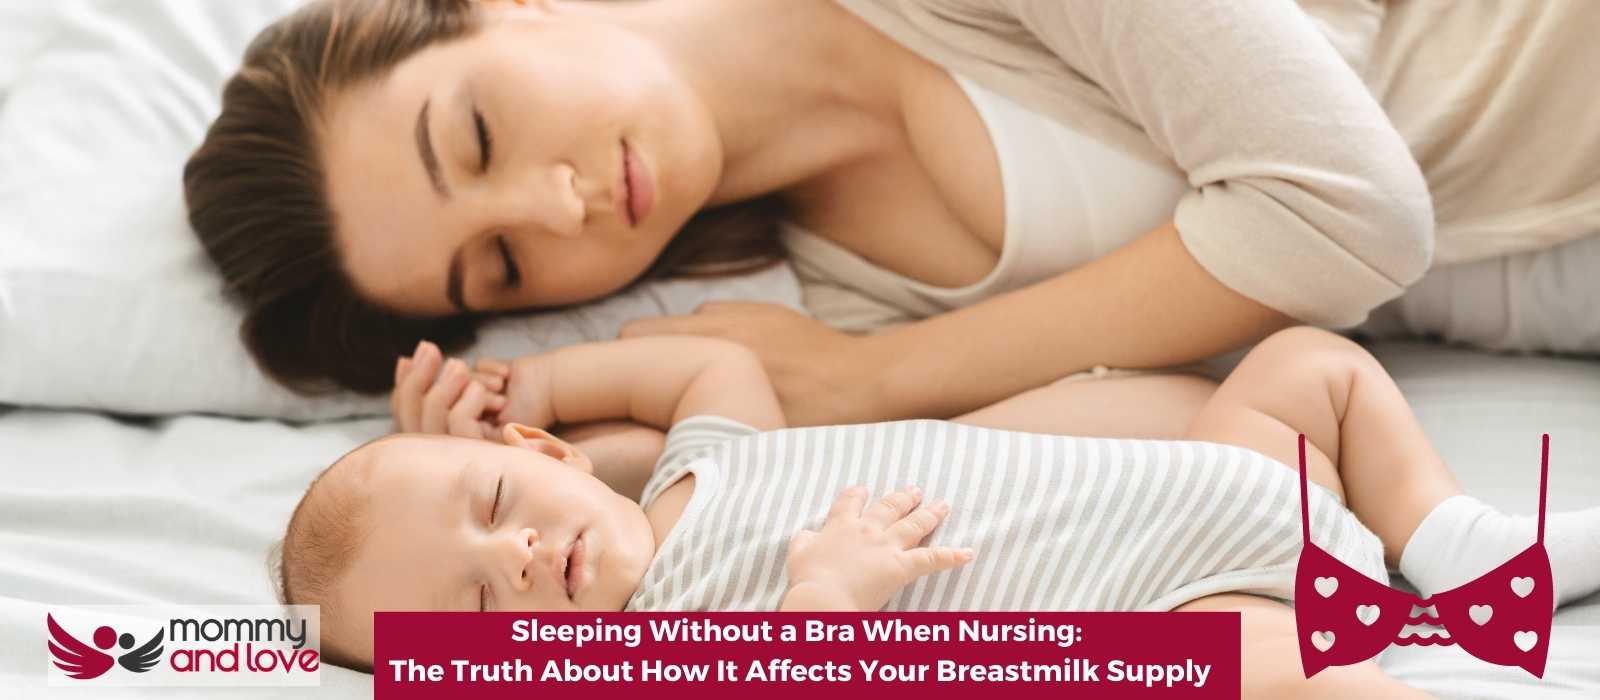 Sleeping Without a Bra When Nursing The Truth About How It Affects Your Breastmilk Supply